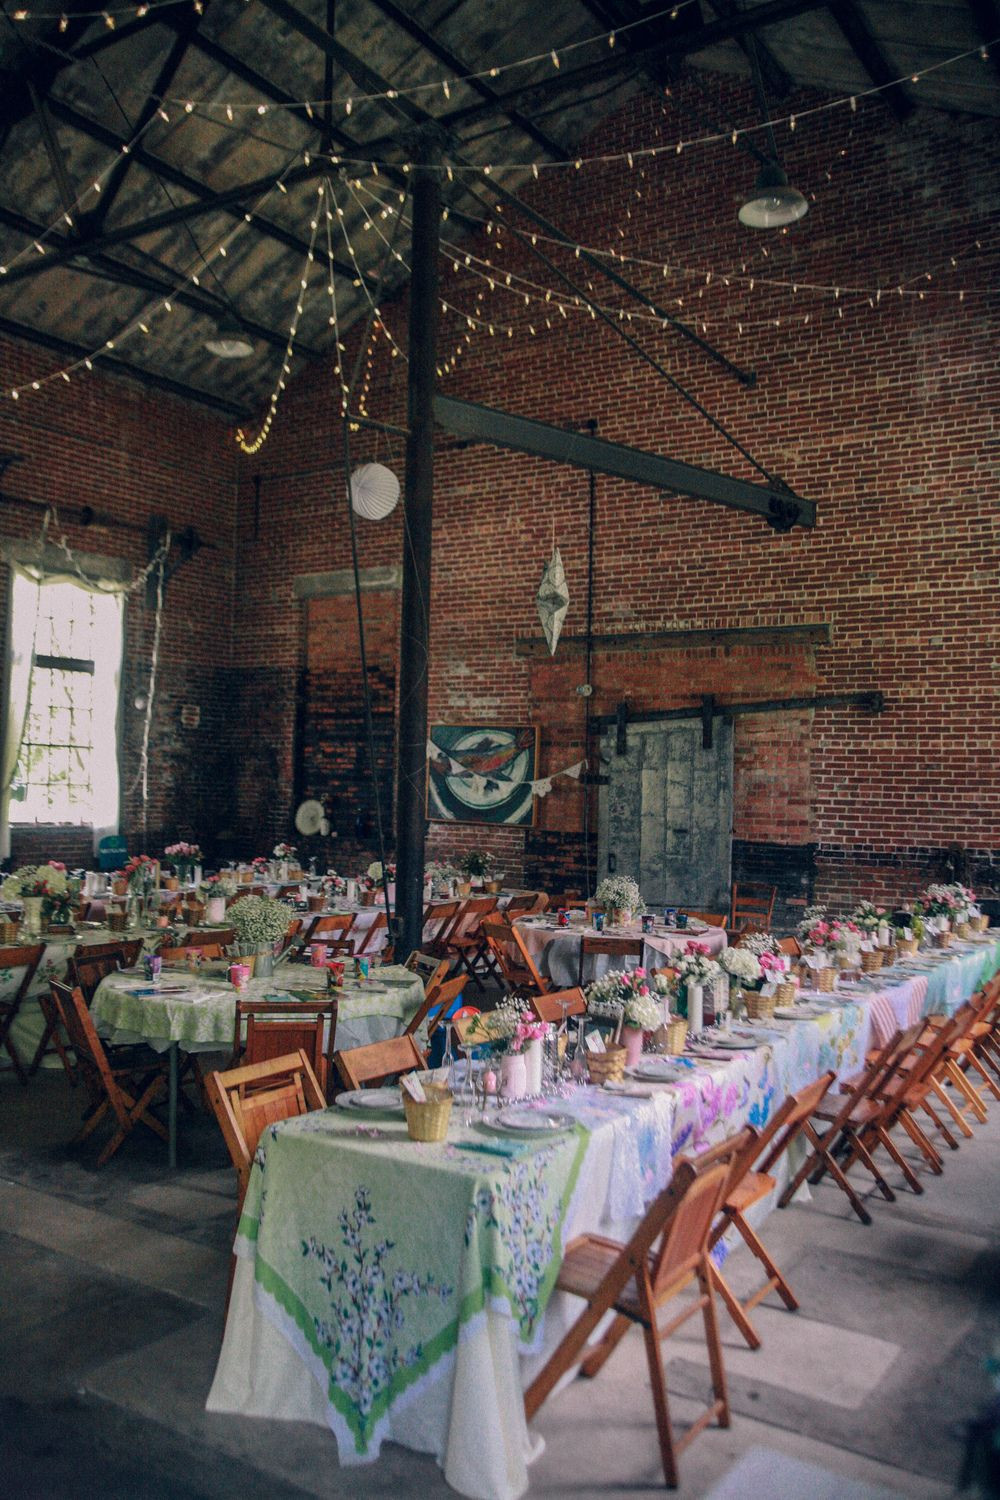 Wedding Venues In Central Pa
 The Pump House Bloomsburg PA wedding venues in central